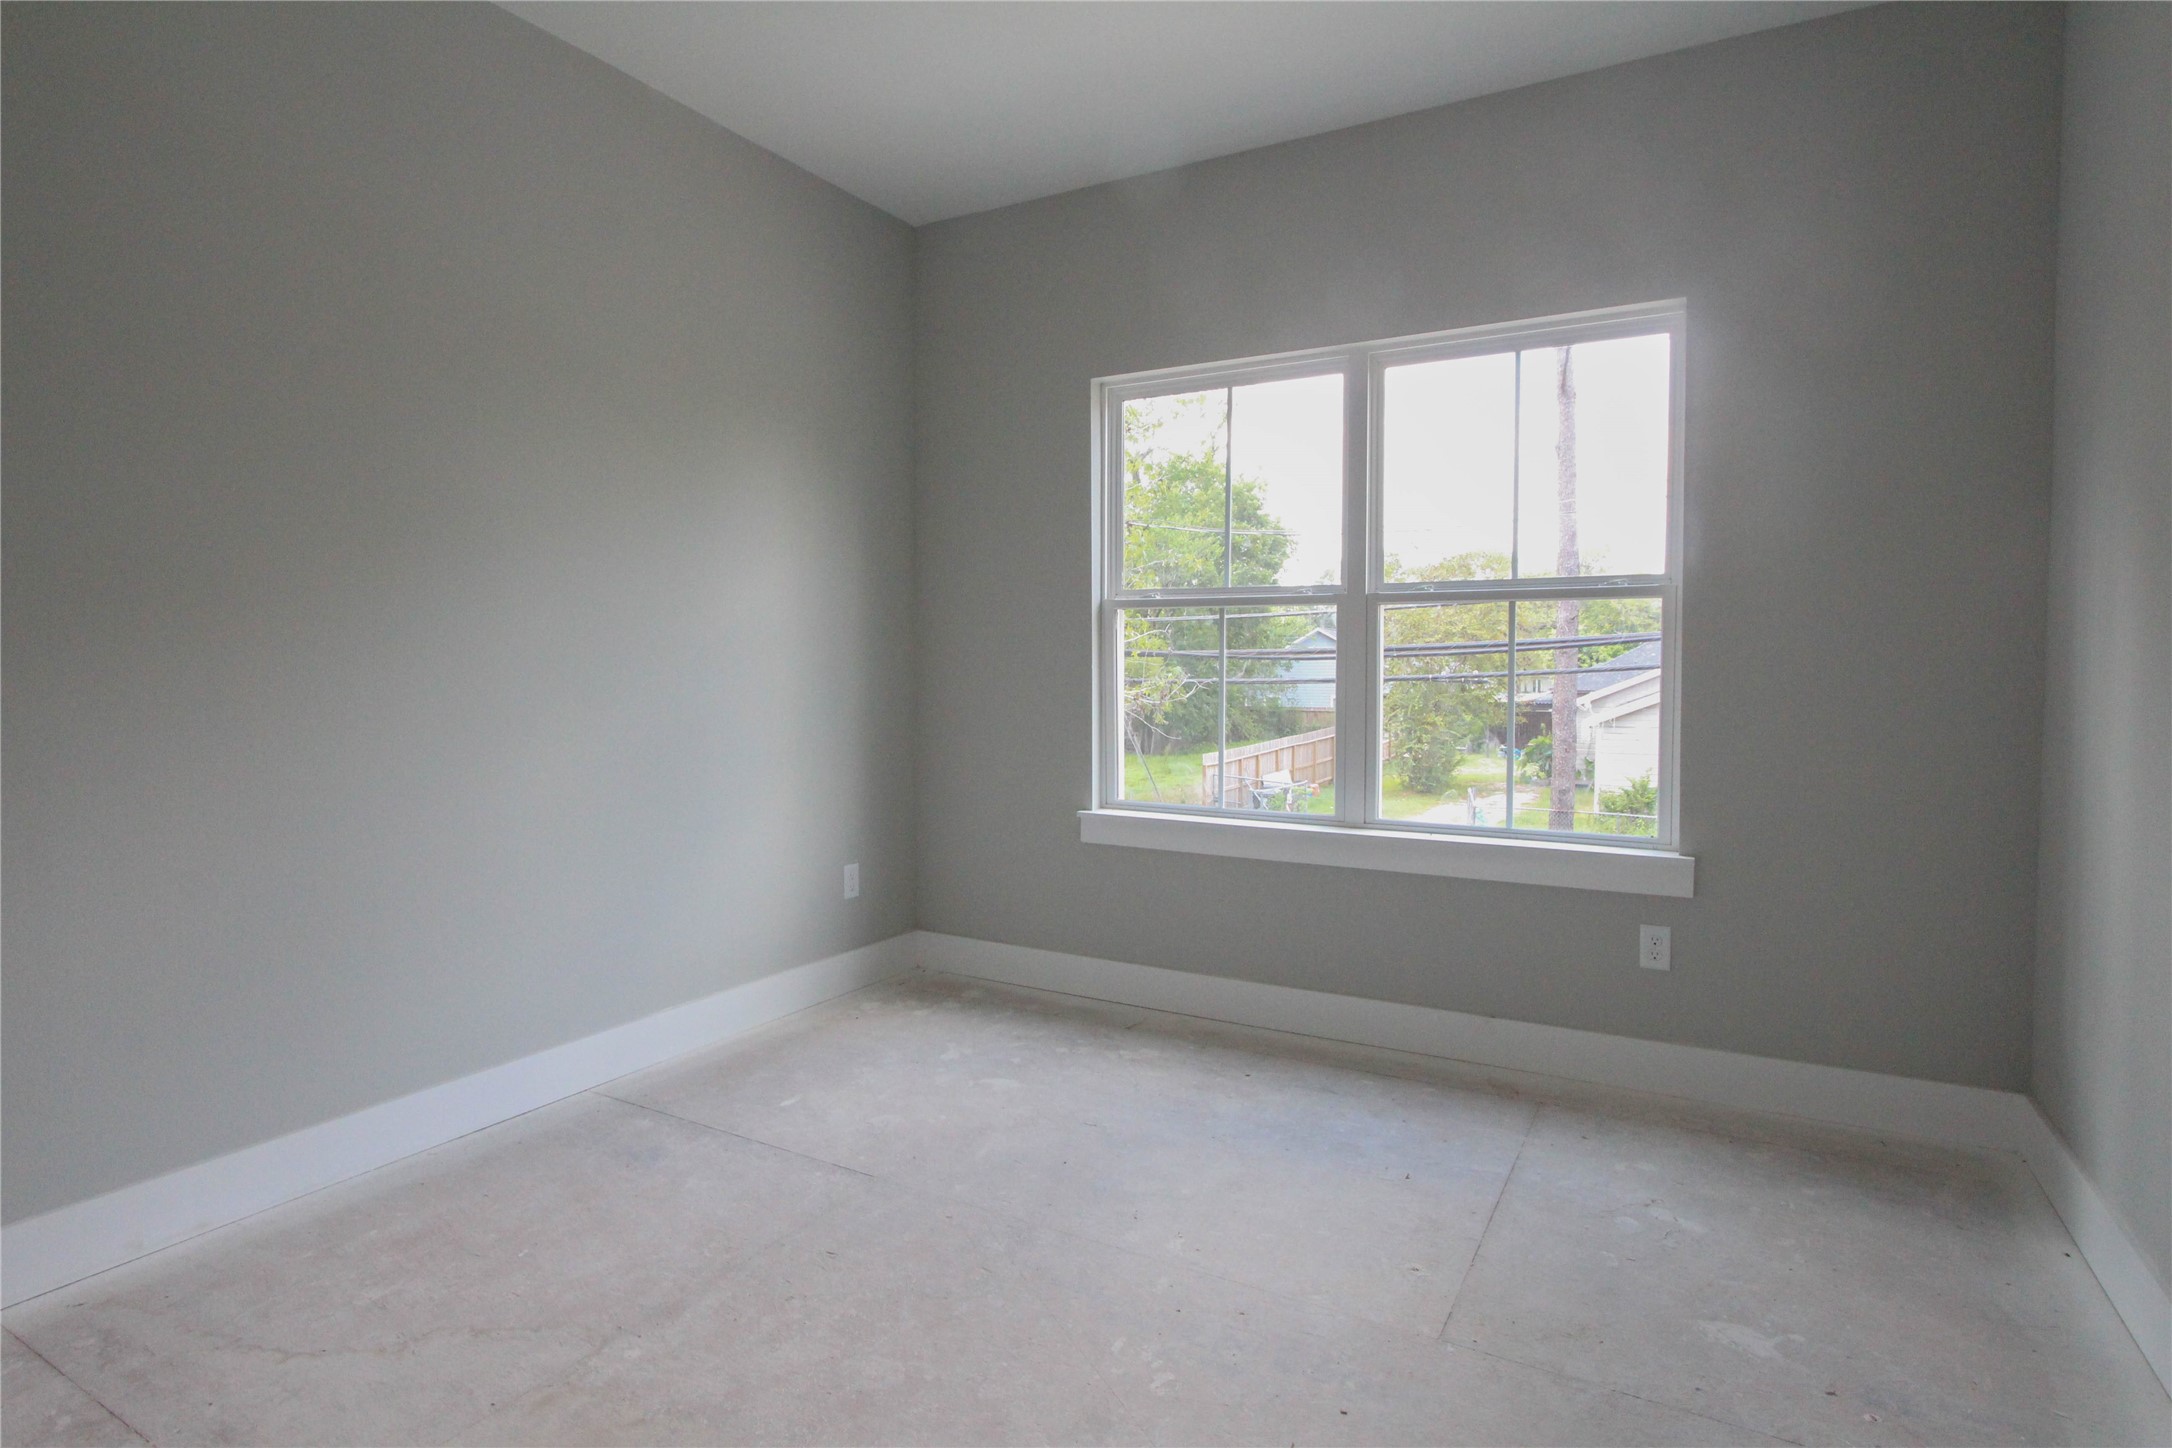 Secondary Bedroom/Hobby Room - If you have additional questions regarding 6436 Cebra  in Houston or would like to tour the property with us call 800-660-1022 and reference MLS# 64253313.